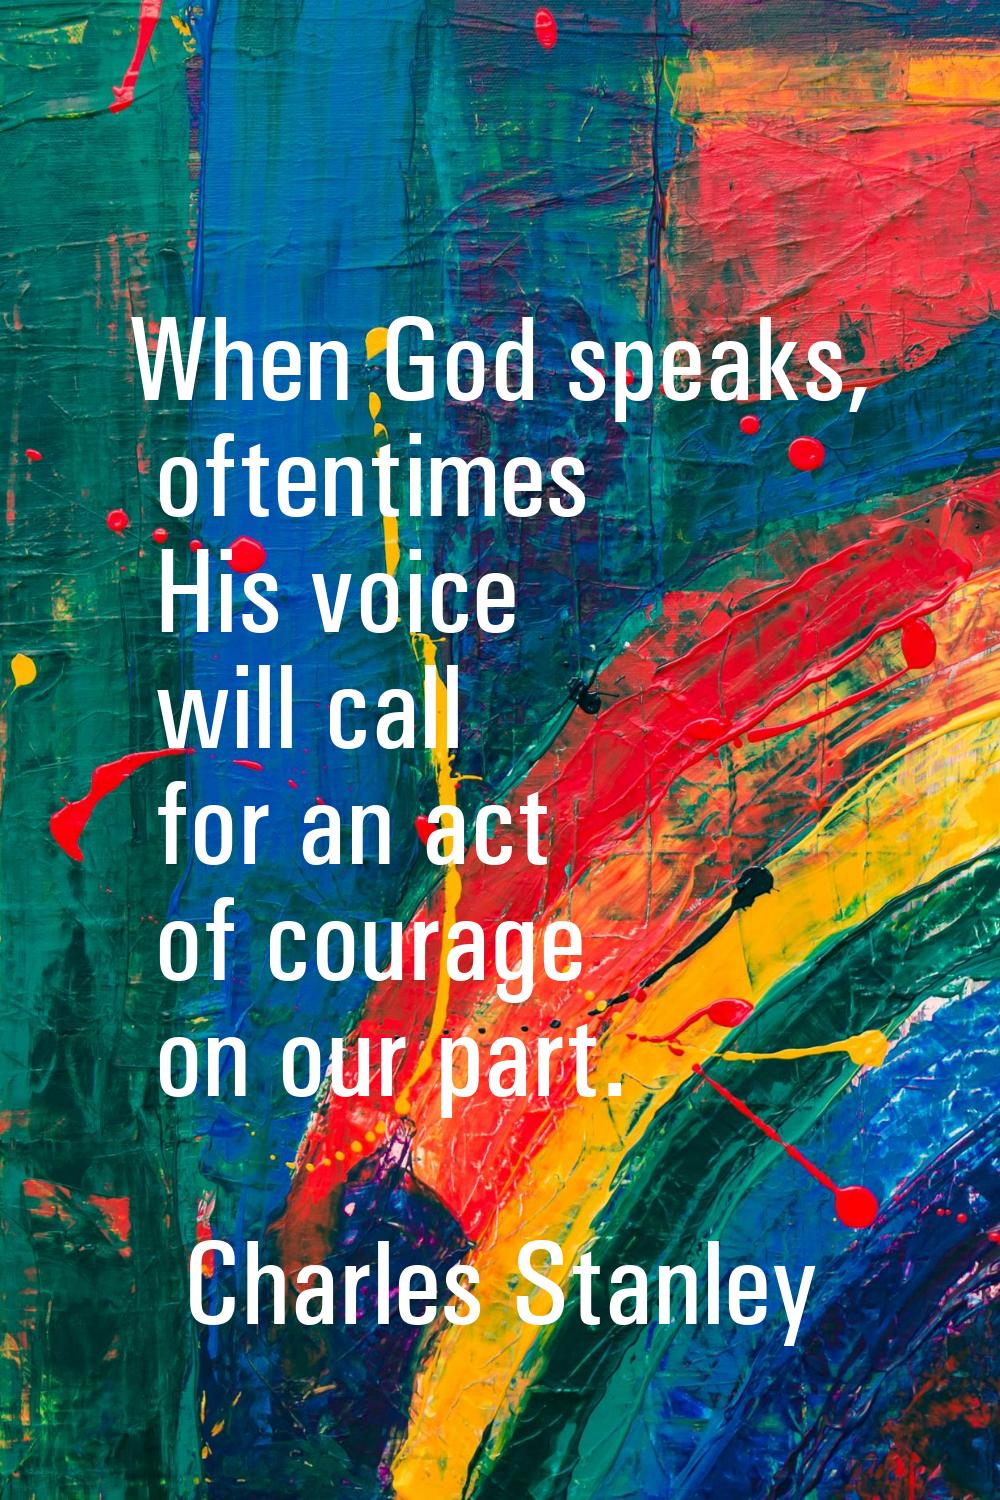 When God speaks, oftentimes His voice will call for an act of courage on our part.